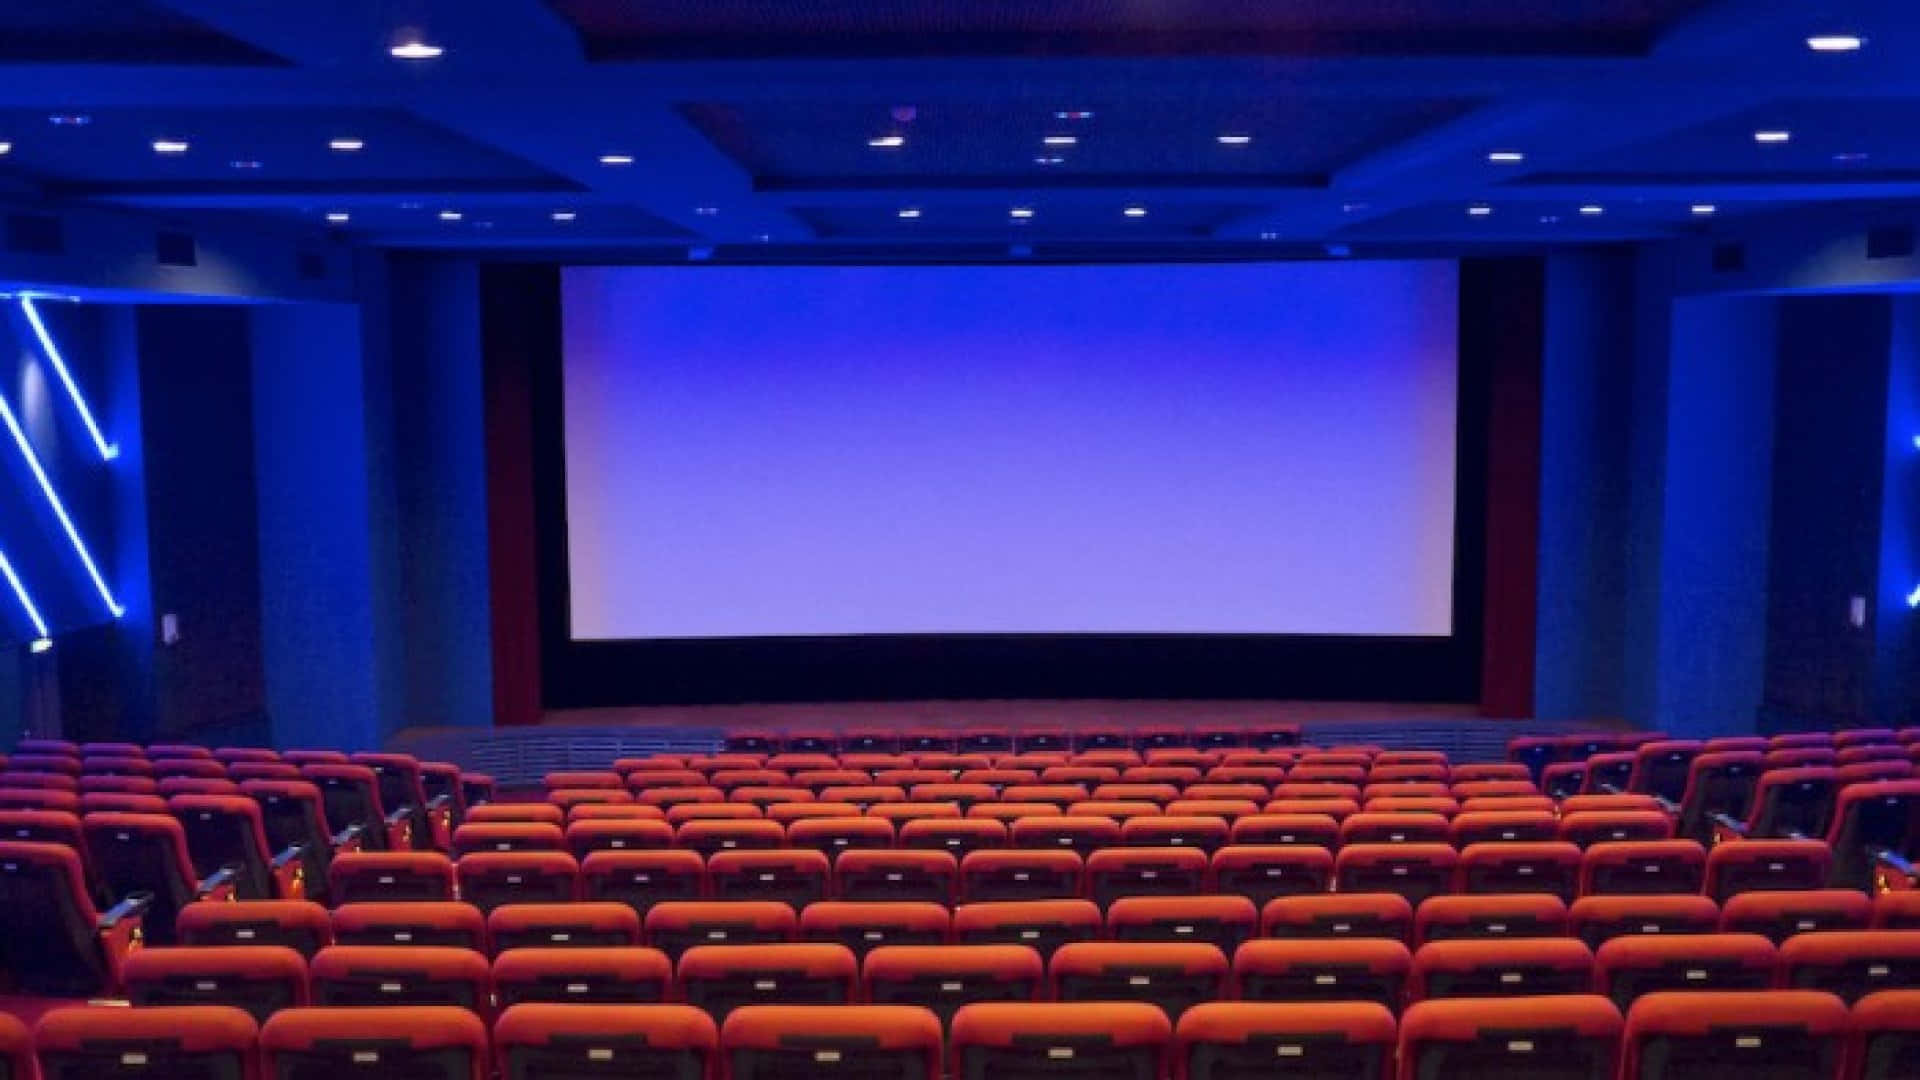 Bring the family and friends and enjoy the latest release in a cozy movie theatre